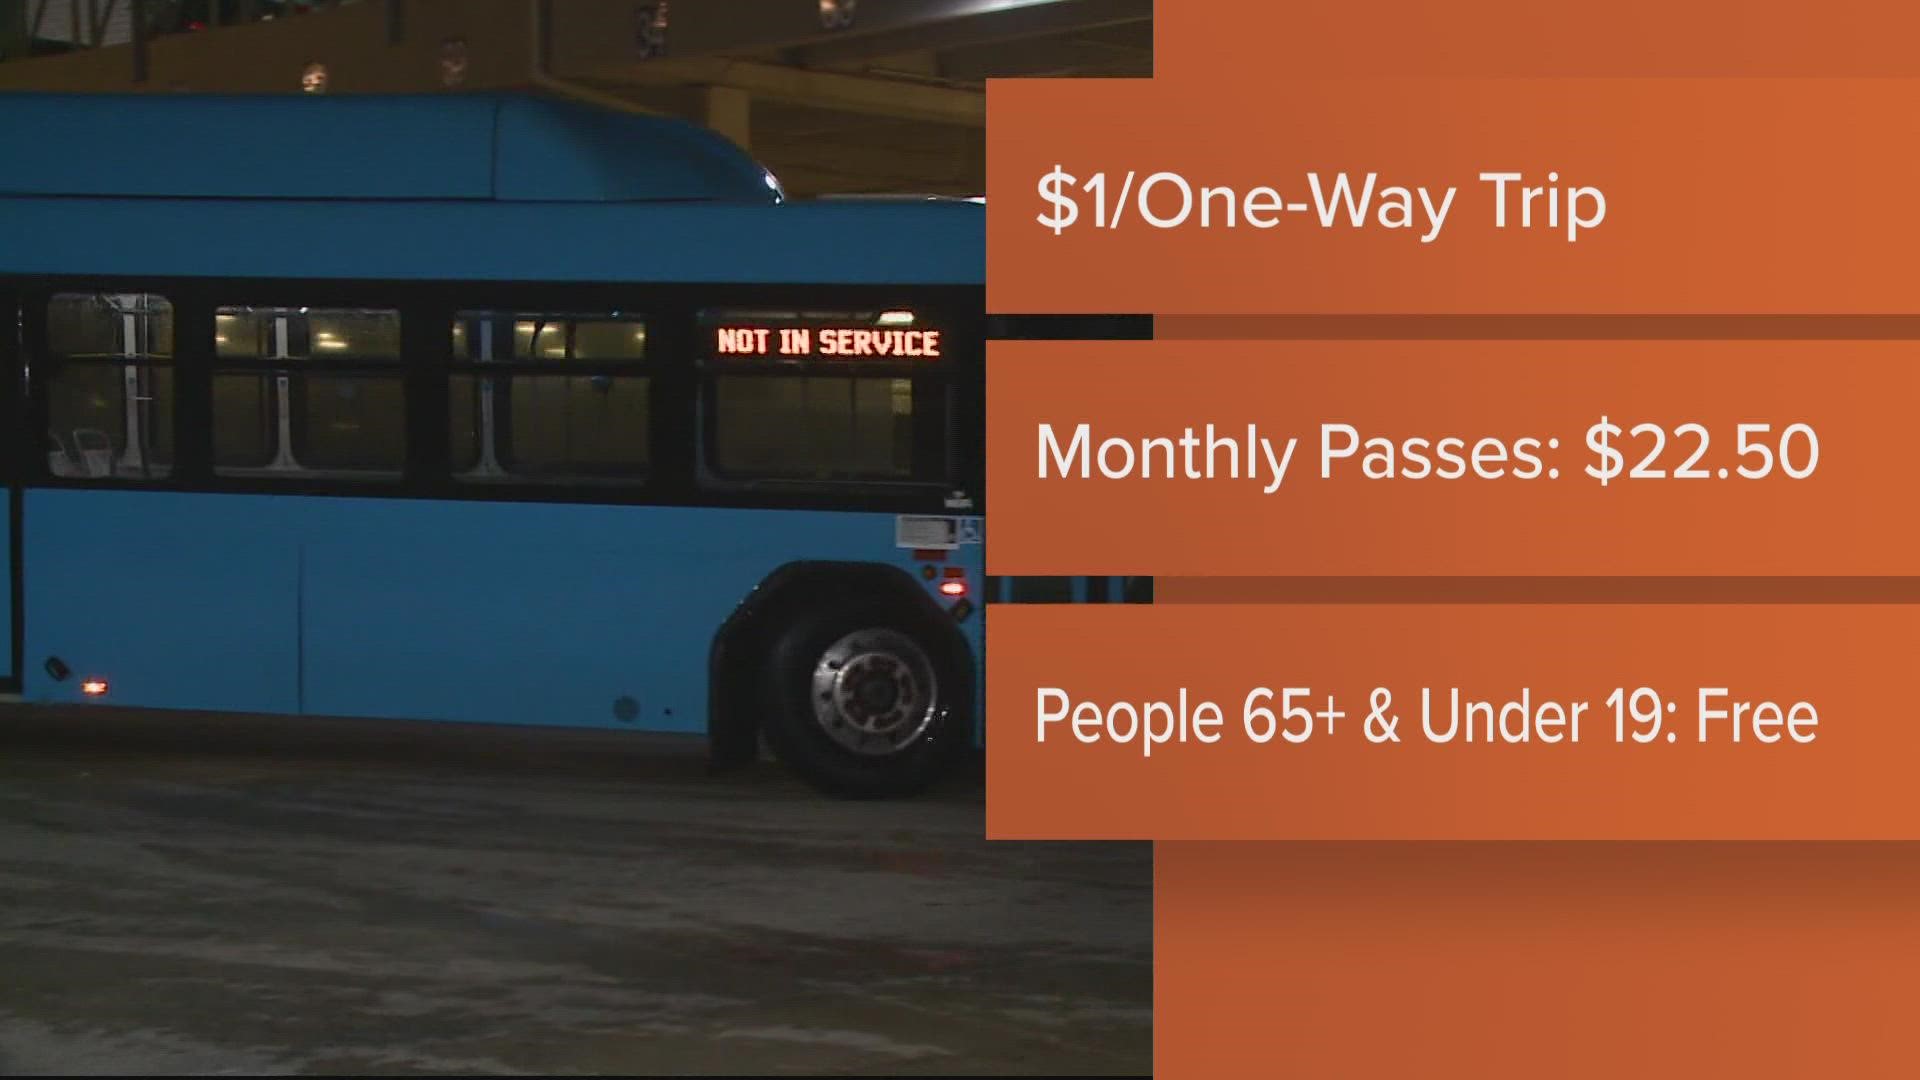 Passengers will have to pay $1 to board the Montgomery County ride bus.